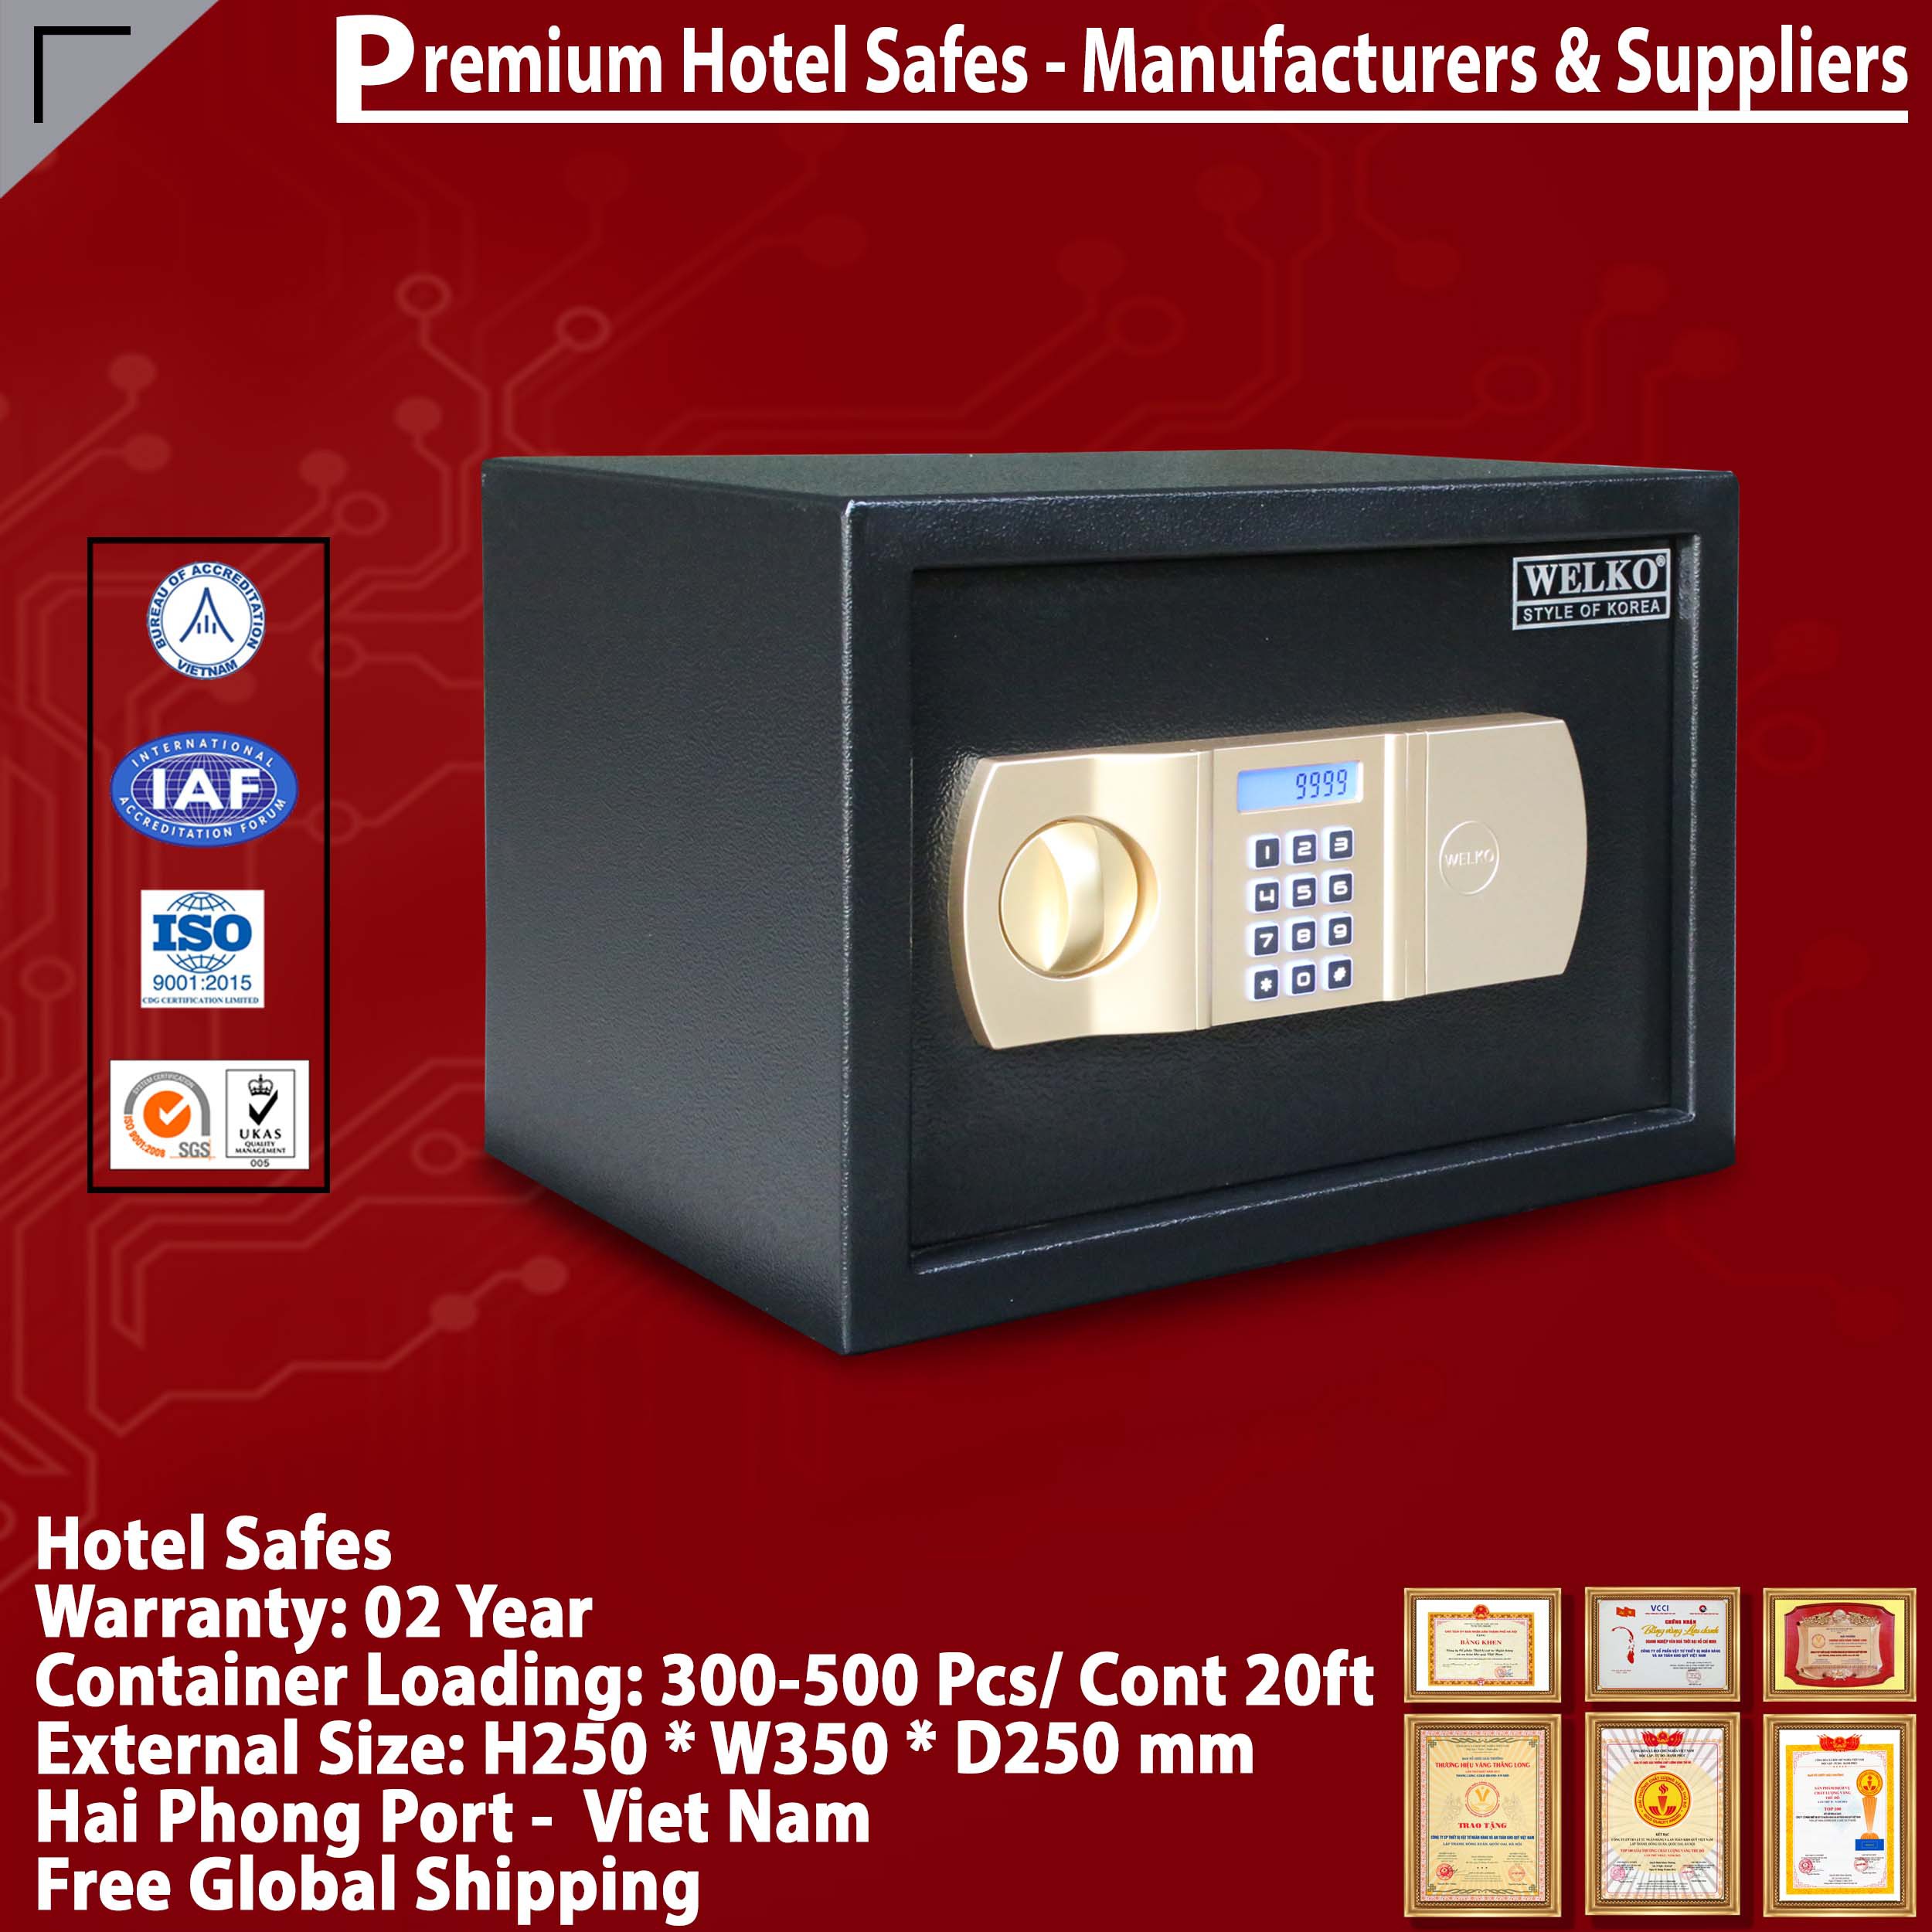 Best Sellers In Hotel Safes Manufacturing Facilit